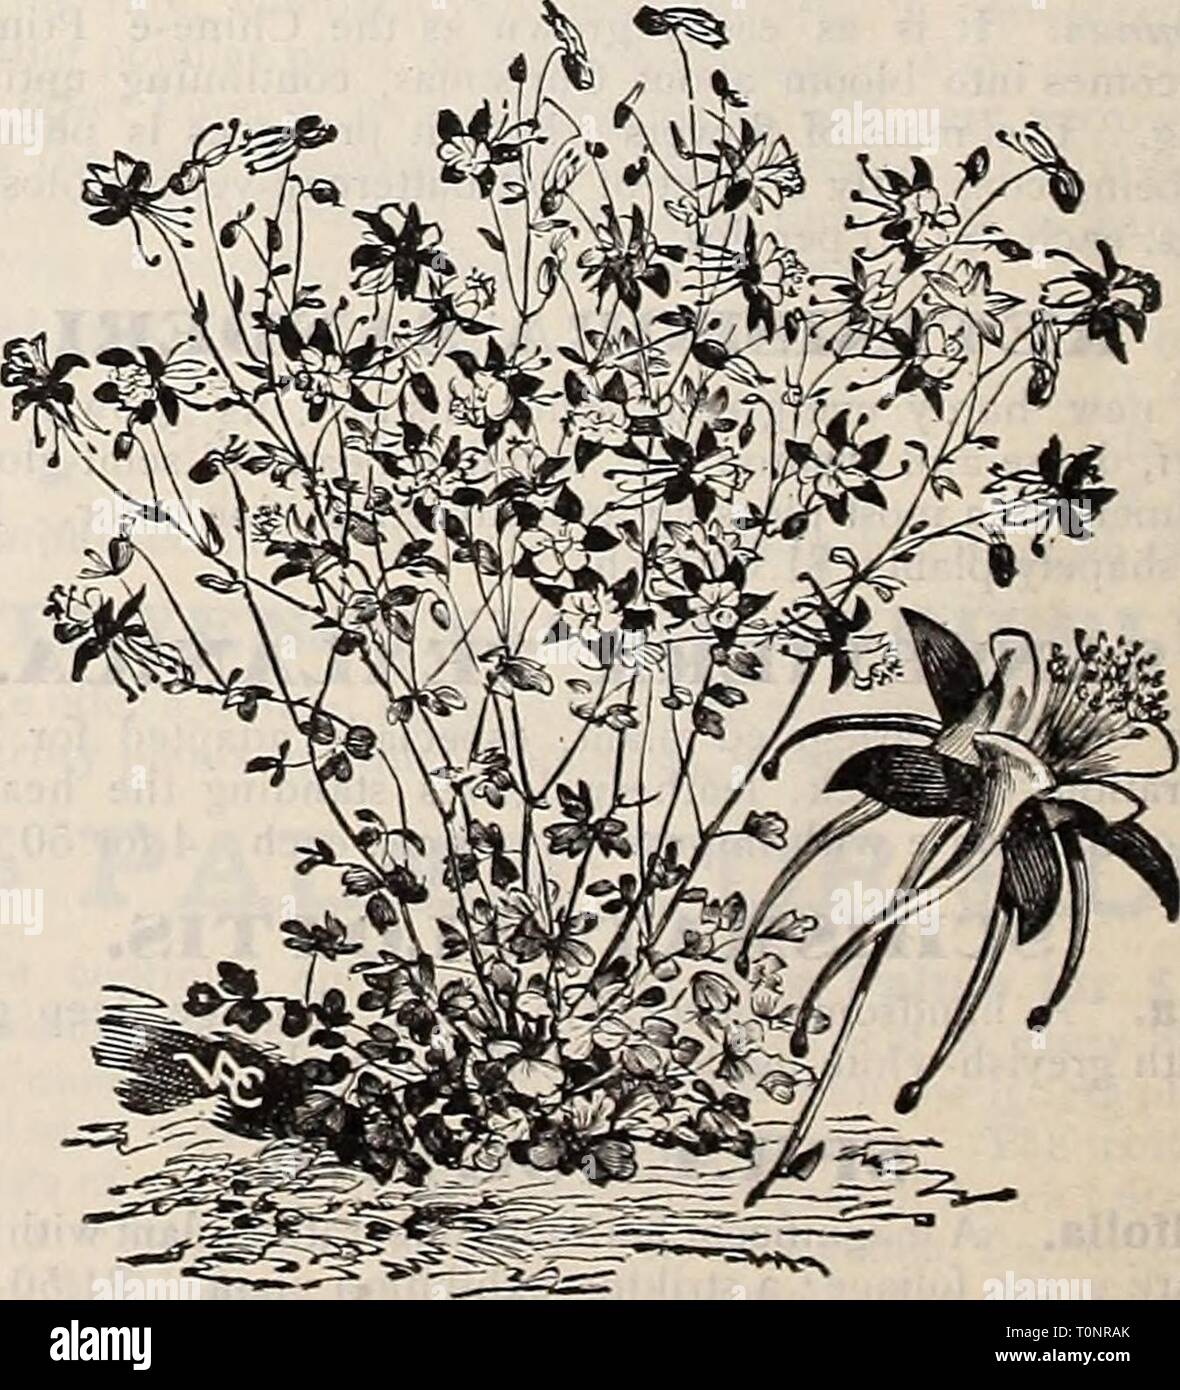 Dreer's autumn catalogue 1906 (1906) Dreer's autumn catalogue 1906  dreersautumncata1906henr Year: 1906  Aster Grandiflorus. A.chillea [BlUfoil or Tarroio). ' The Pearl.' Pure white, flowers allsummeir; 2 fl. niipendiila {Noble Tai''ow. Large corymbs; golden yel- low ; July ; 2 ft. Millefolium Rosenxa '.Rofsy W!/oil). Rosy pink; blooms all summer; 18 inches. Eupatorium {Fern-leaved Yarrow). Brilliant yellow; 4 ft. Tomentosa (Woolly Yarrow). Golden yellow; June. Adonis Pyrenaica. Orange-yellow; May. 25 cts. each; $2.50 per doz. Vernalis {Ox-Eye). One cf the earliest spring flowers; large yello Stock Photo